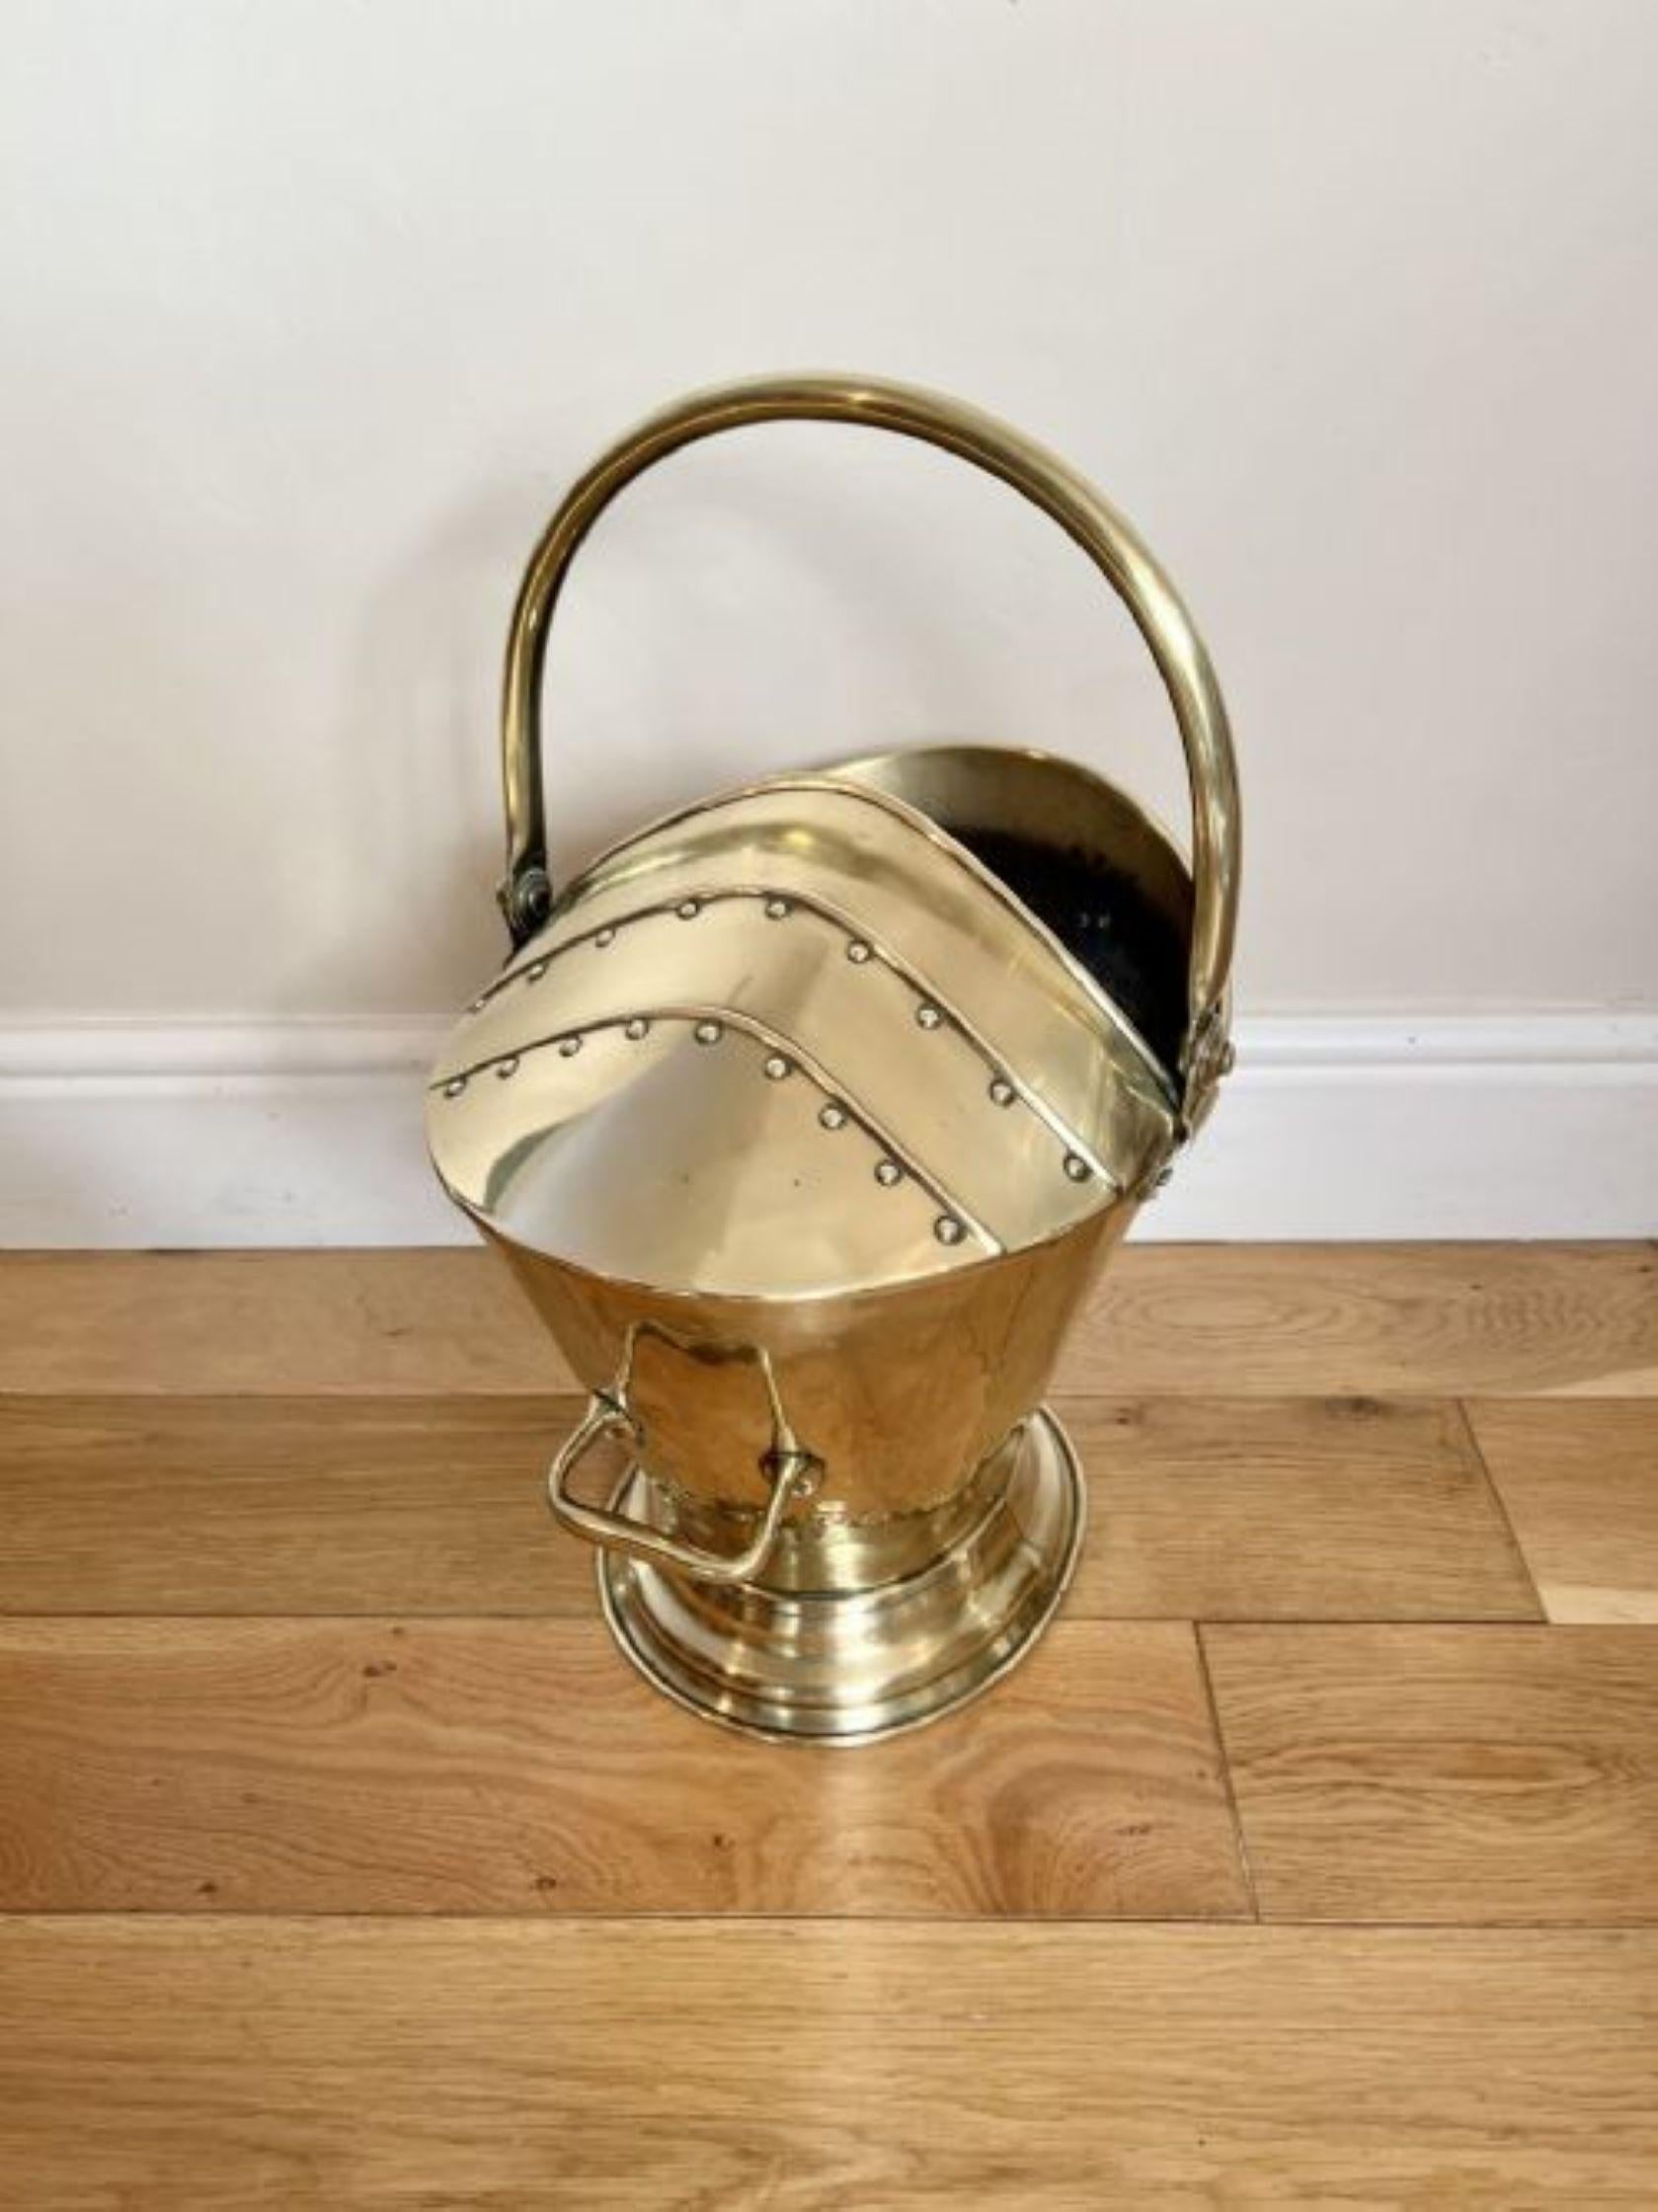 Wonderful antique Victorian quality brass coal scuttle having a quality antique victorian brass coal scuttle with a swing handle to the top, a handle to the back and a half covered top with brass rivet decoration, standing on a circular stepped base